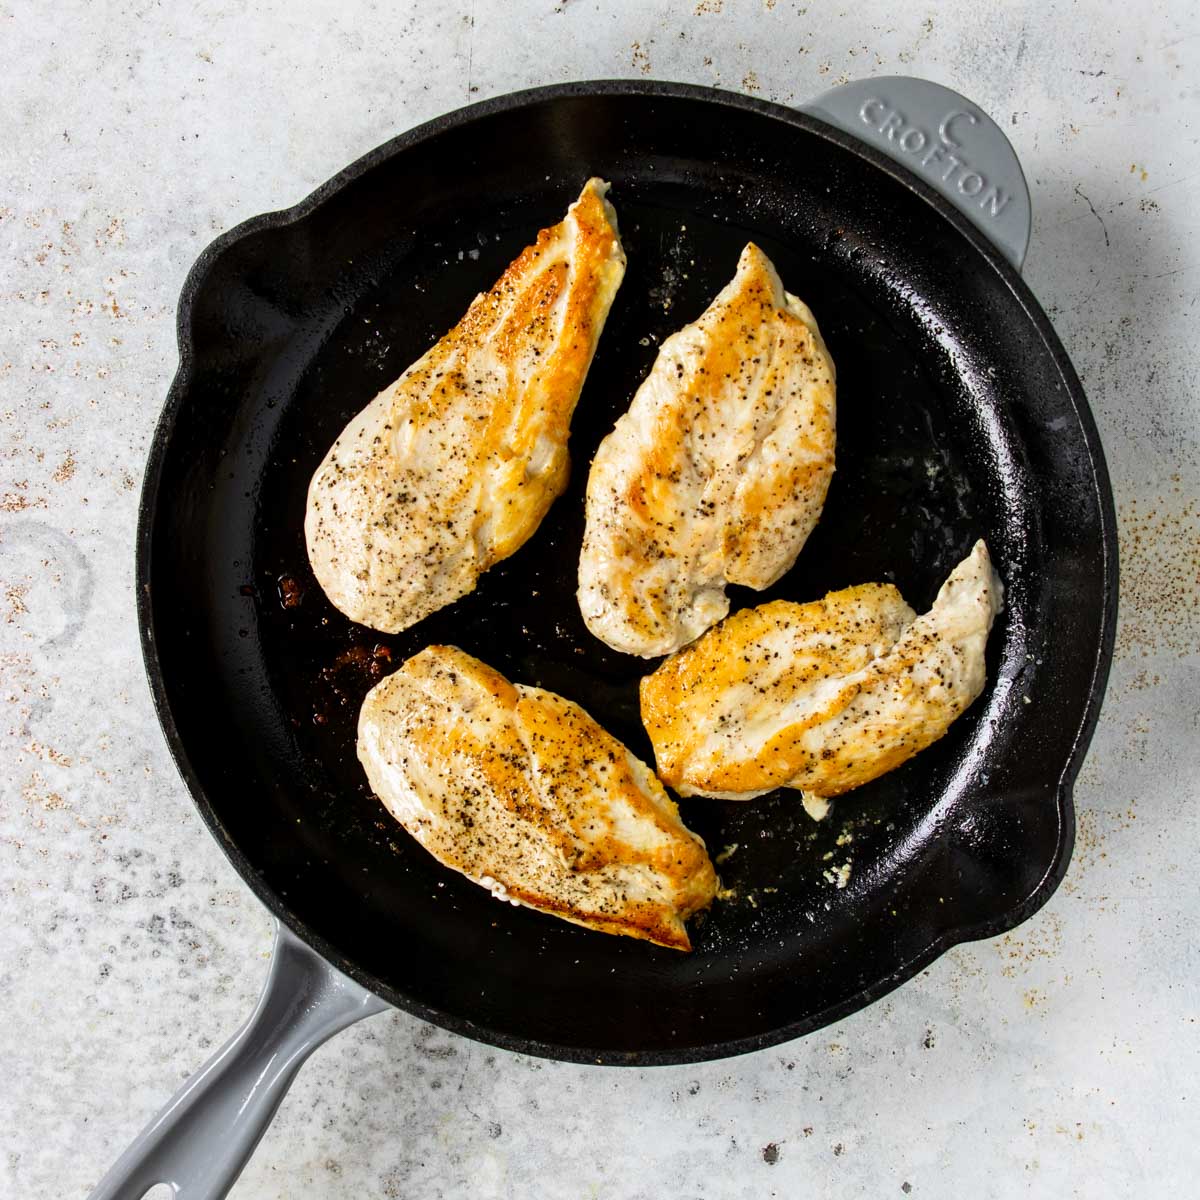 4 cooked chicken breasts in a skillet